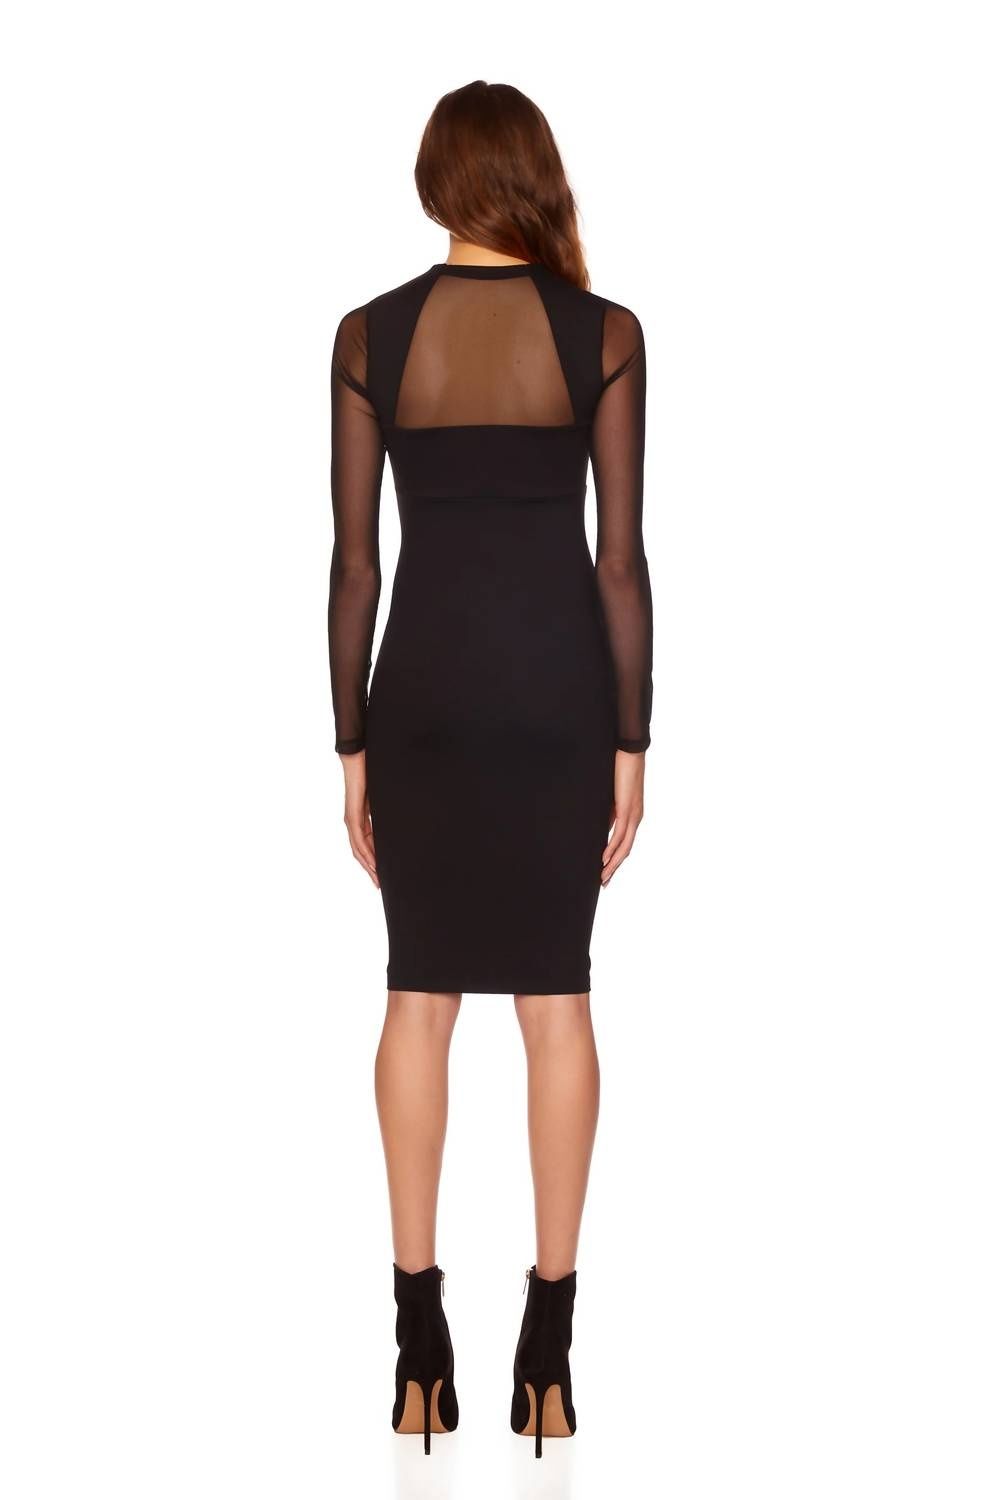 Style 1-2174794898-3236 Susana Monaco Size S Long Sleeve Sheer Black Cocktail Dress on Queenly